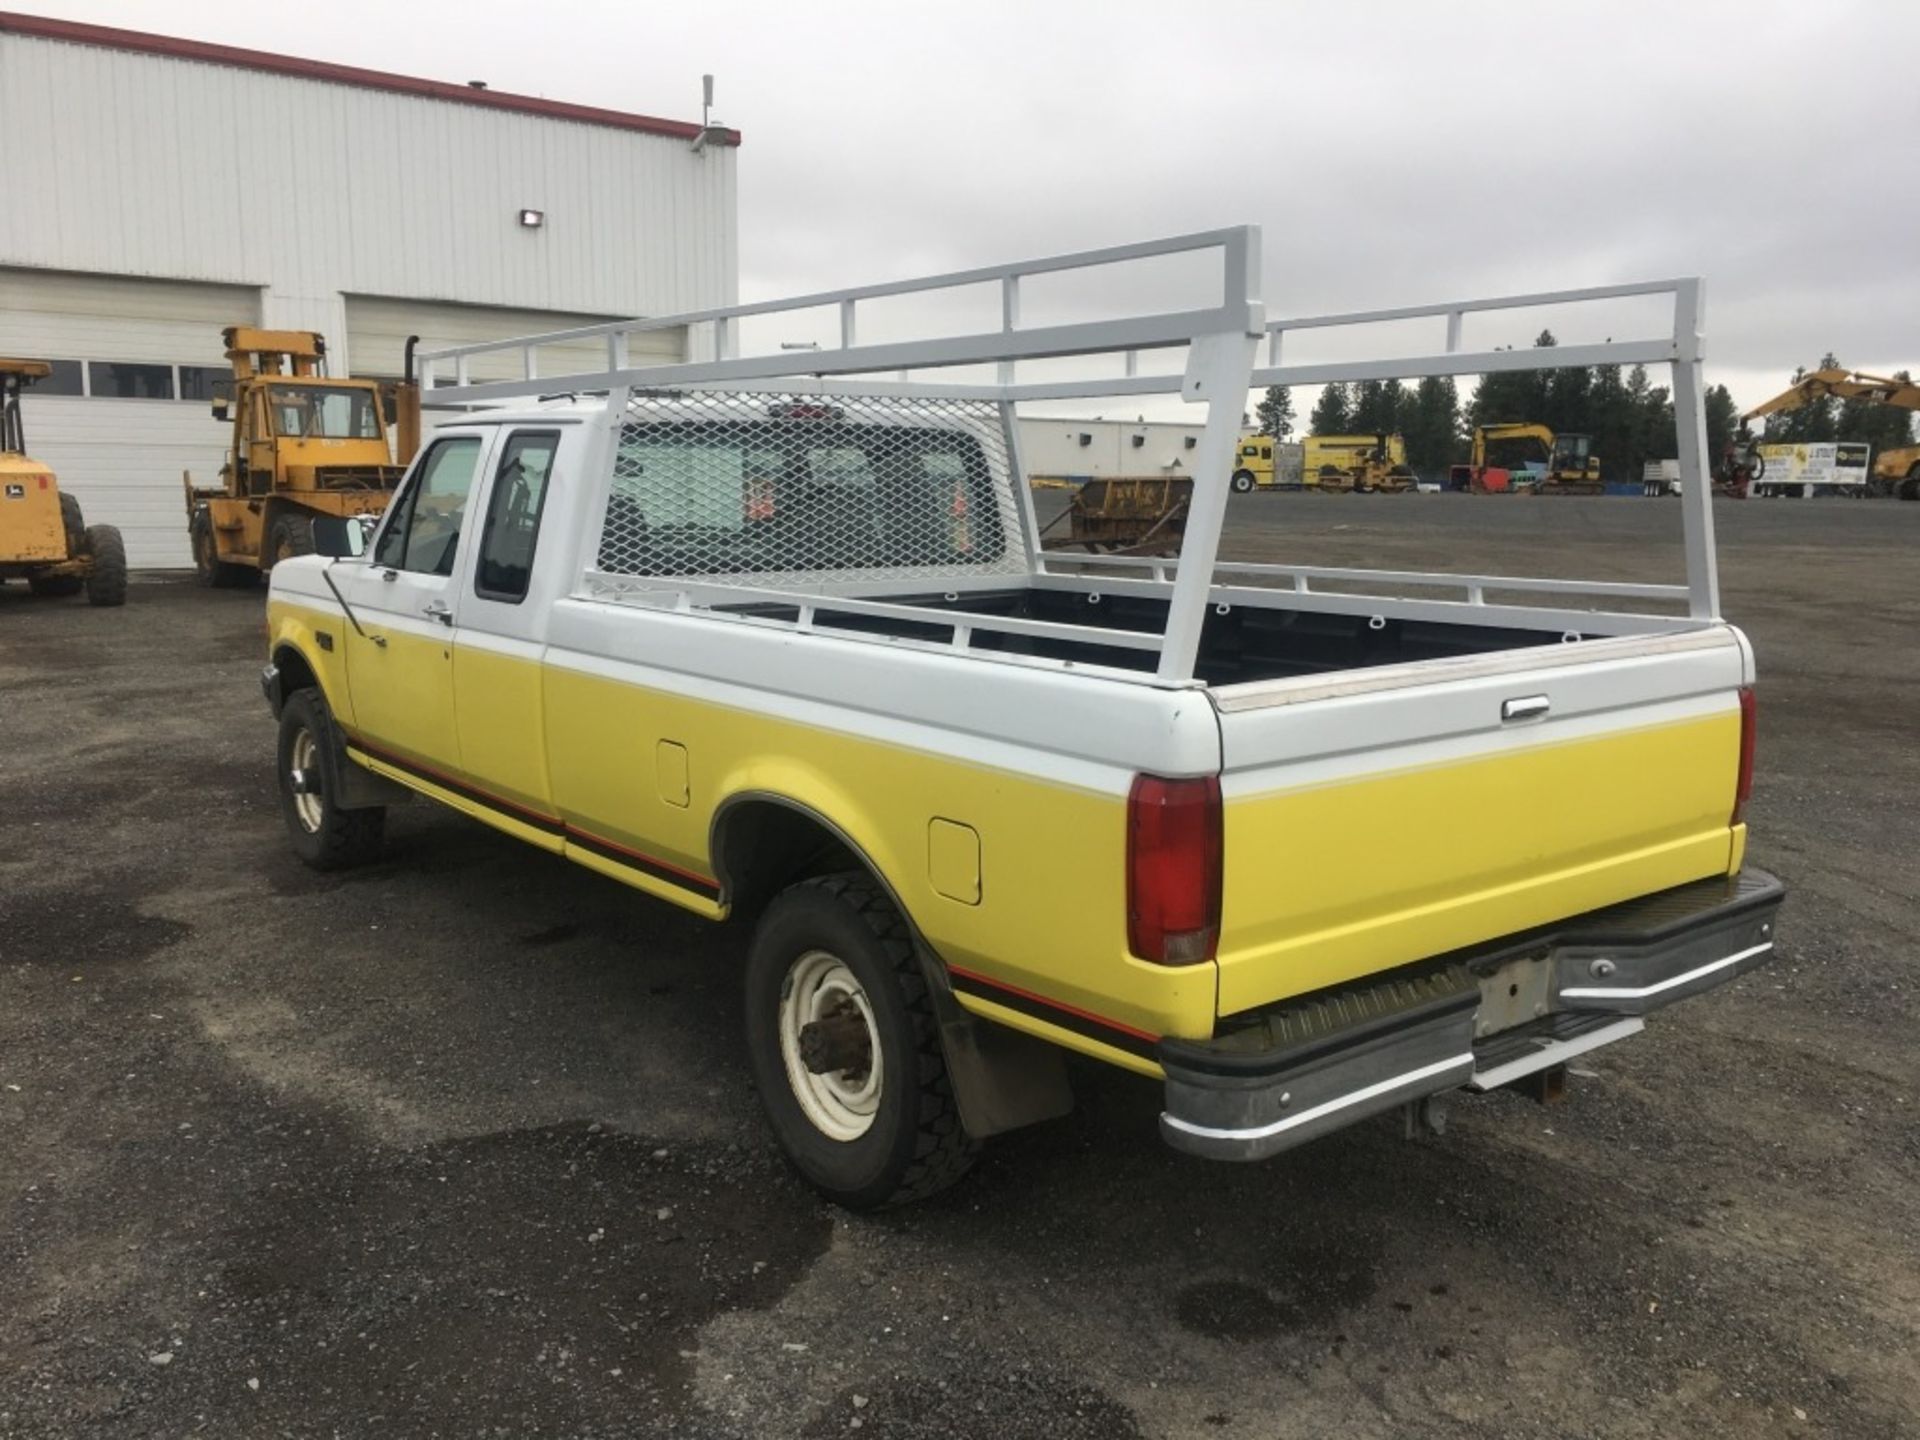 1996 Ford F250 XLT 4x4 Extra Cab Pickup - Image 2 of 20